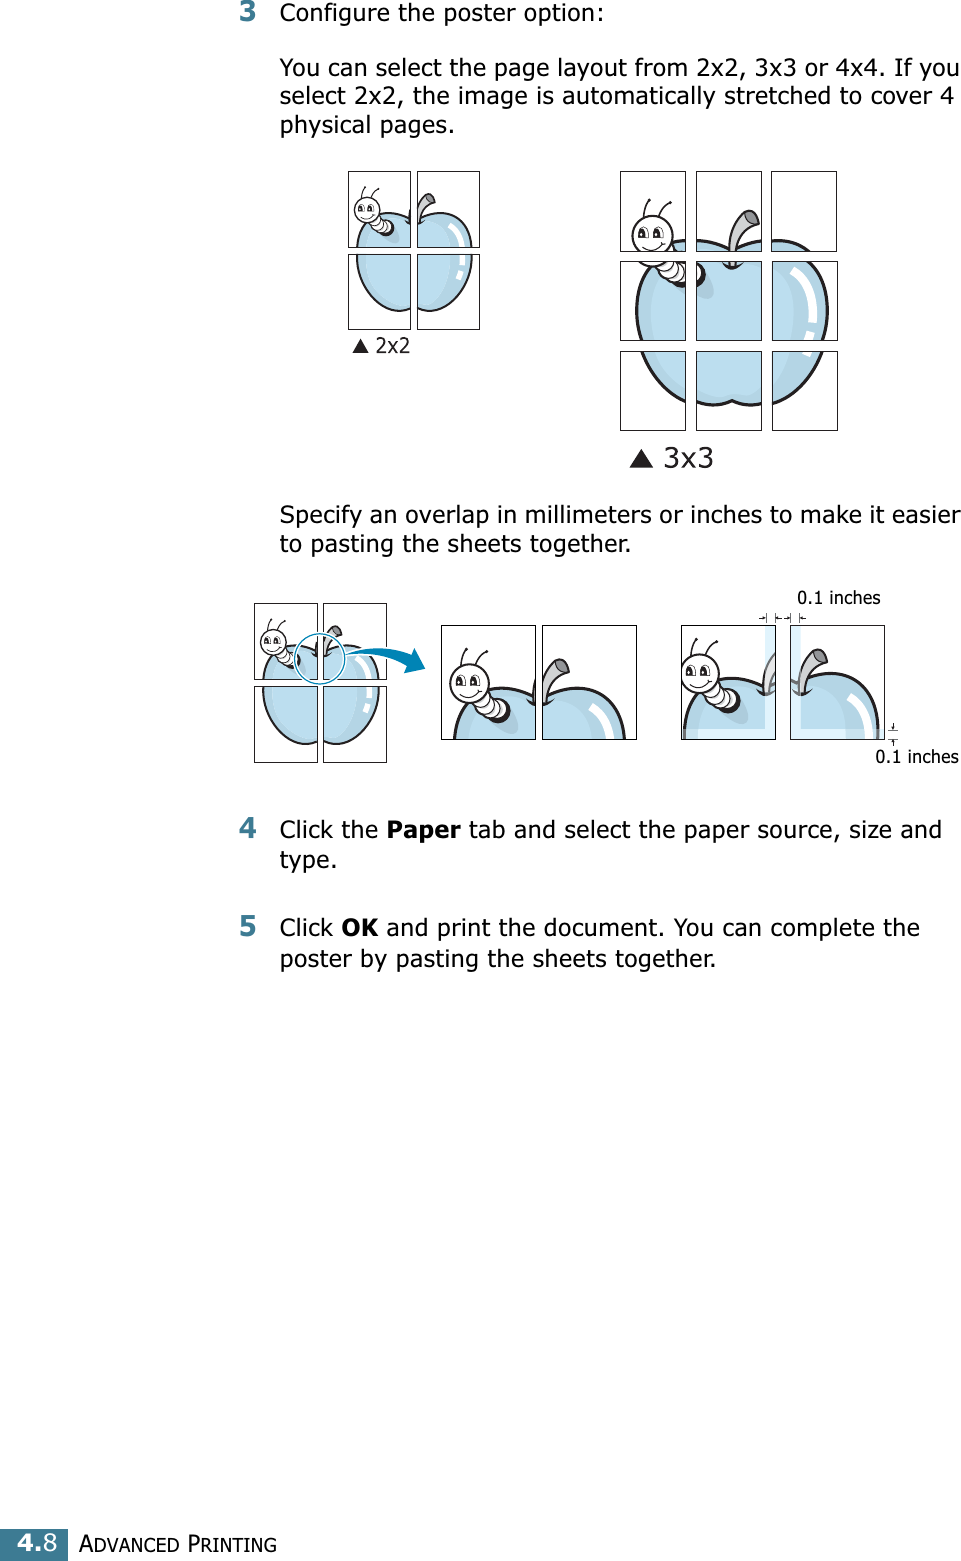 ADVANCED PRINTING4.83Configure the poster option:You can select the page layout from 2x2, 3x3 or 4x4. If you select 2x2, the image is automatically stretched to cover 4 physical pages. Specify an overlap in millimeters or inches to make it easier to pasting the sheets together. 4Click the Paper tab and select the paper source, size and type.5Click OK and print the document. You can complete the poster by pasting the sheets together. 0.1 inches0.1 inches